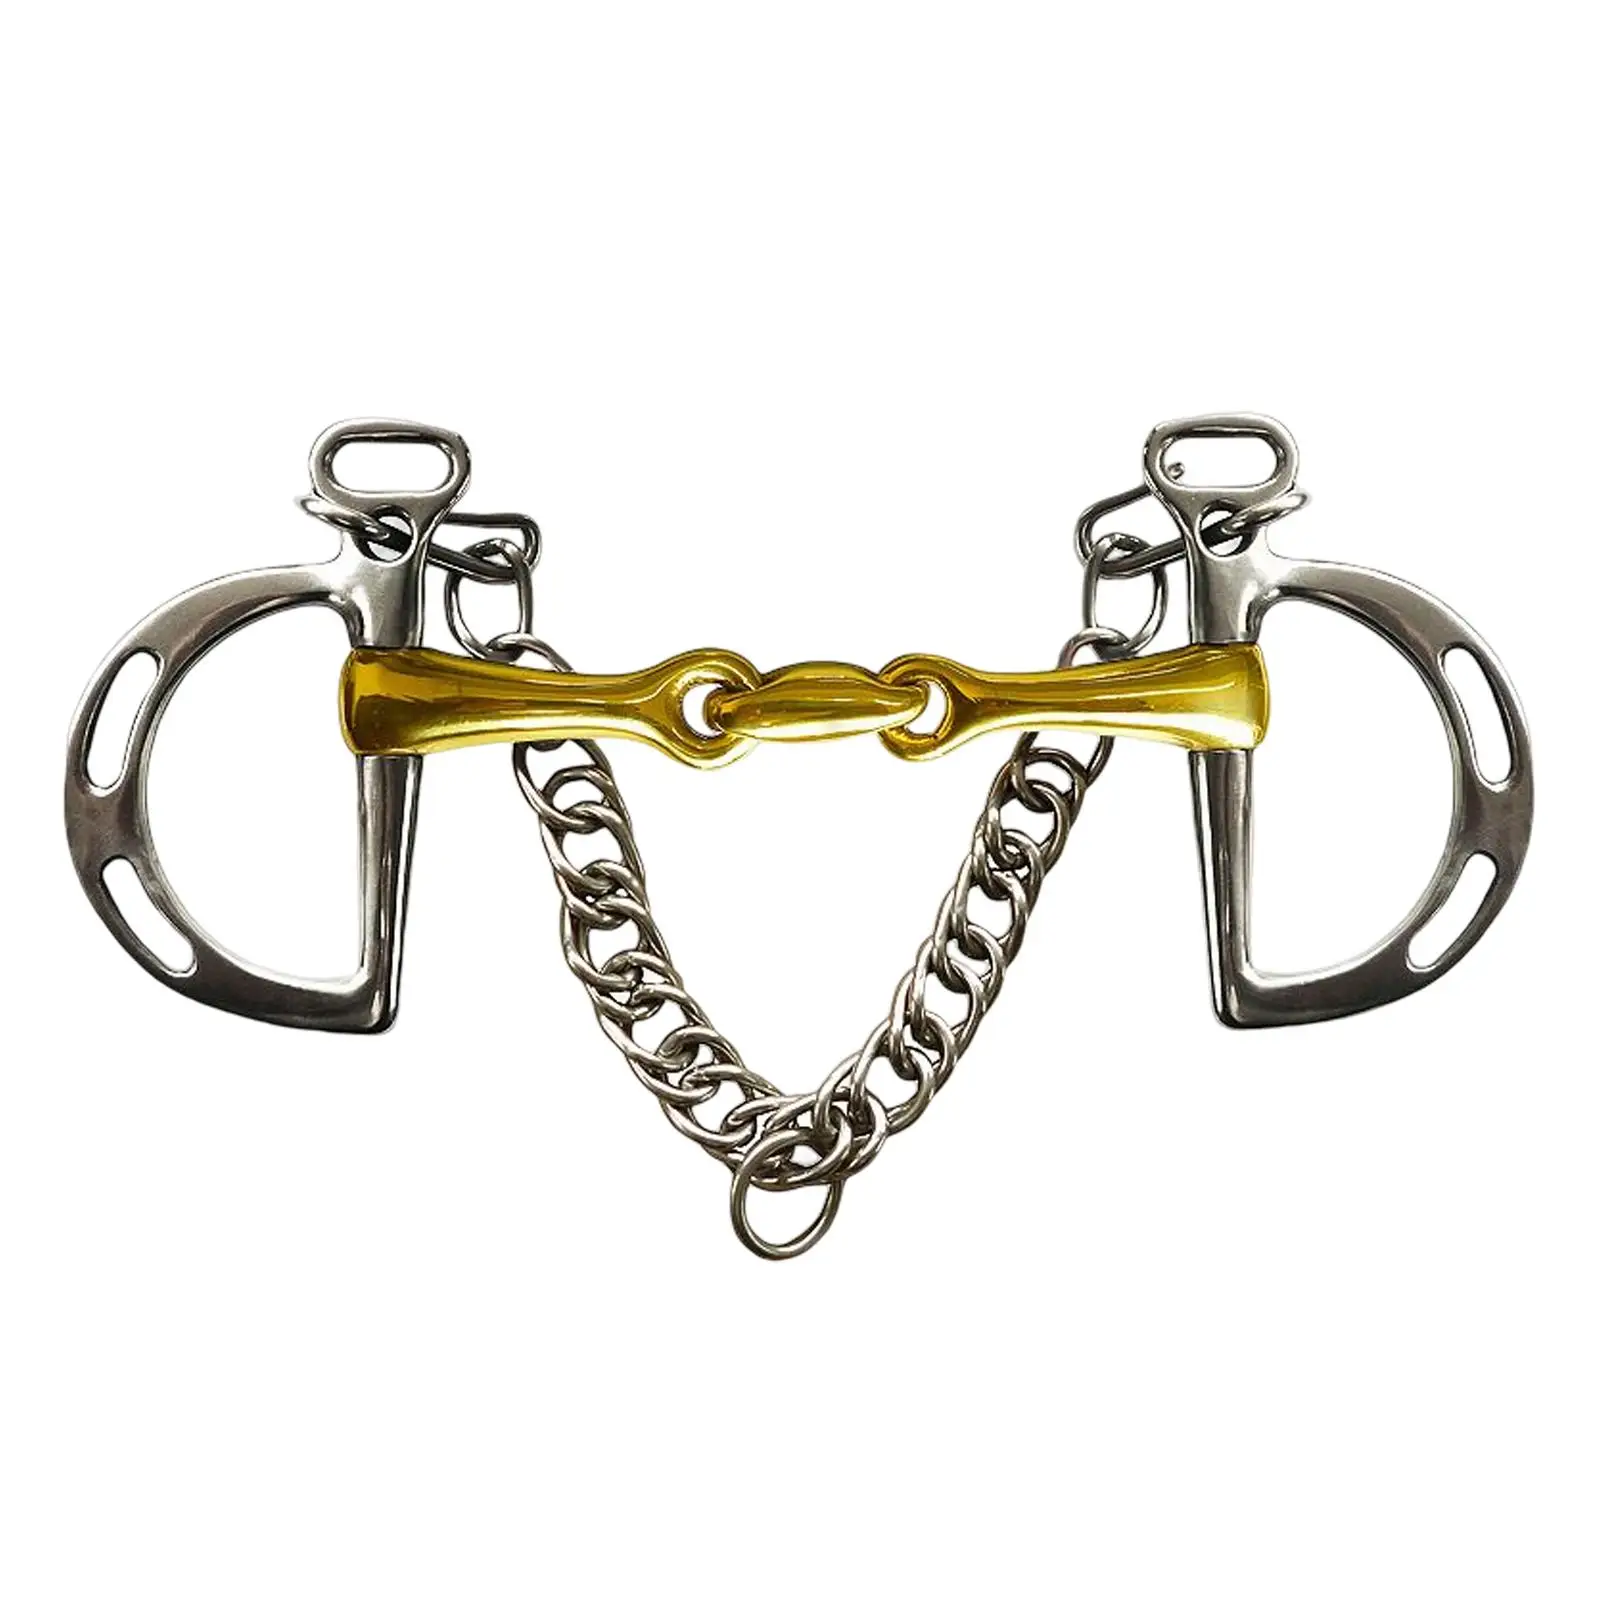 Horse Bit , Copper Mouth Horse Gag Bit with Curb Hook Chain, Copper Roller Cheek Harness, for